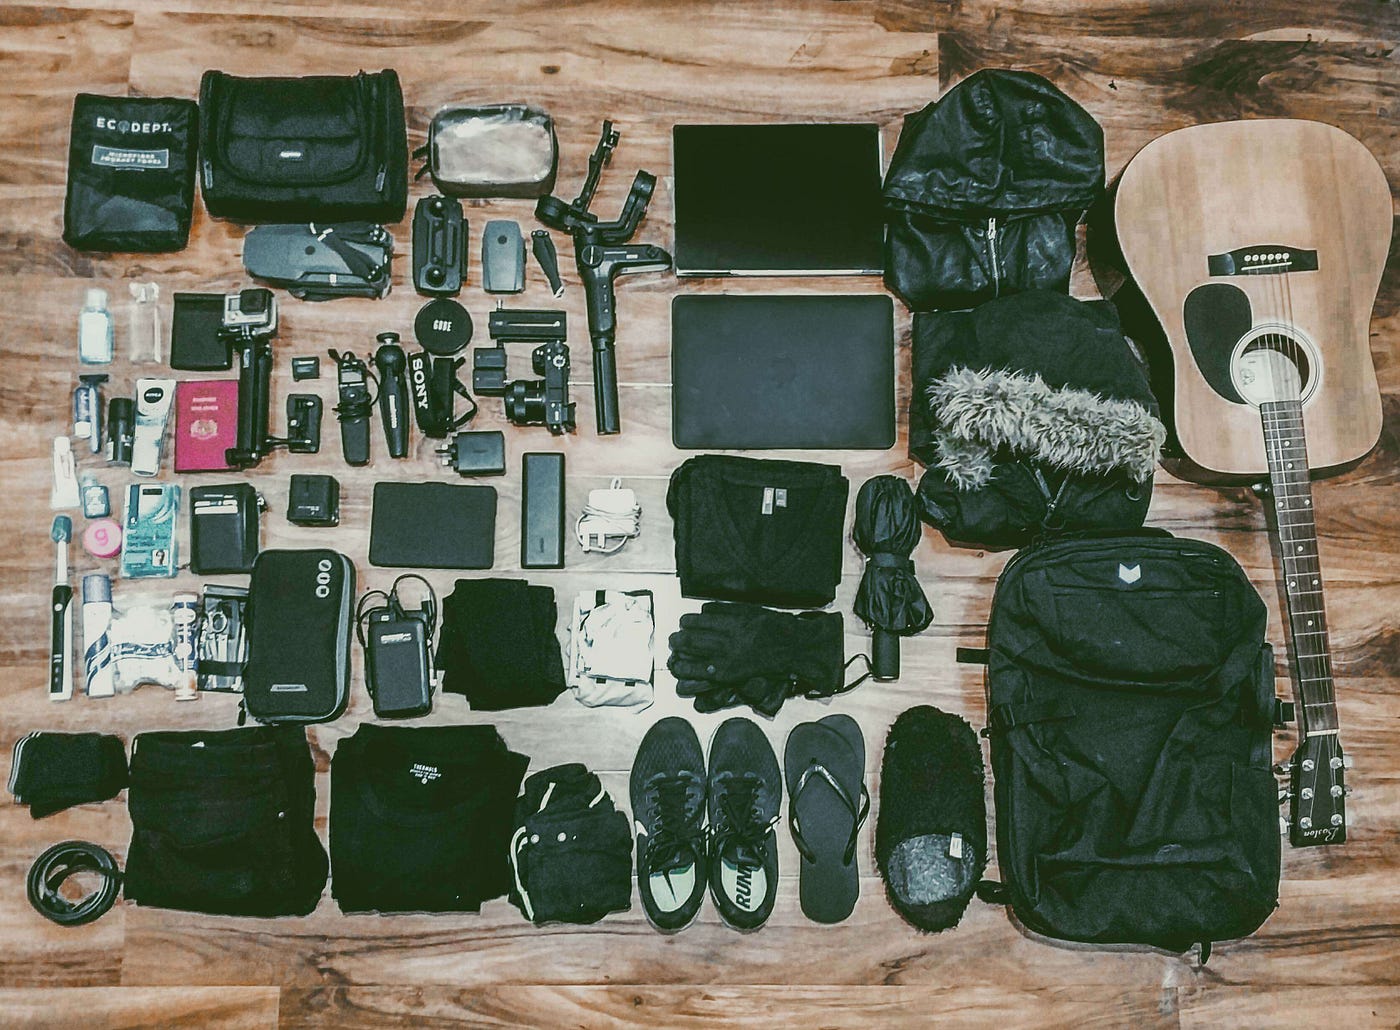 This is everything I own — fits into one backpack | by Ryzal Yusoff | Medium